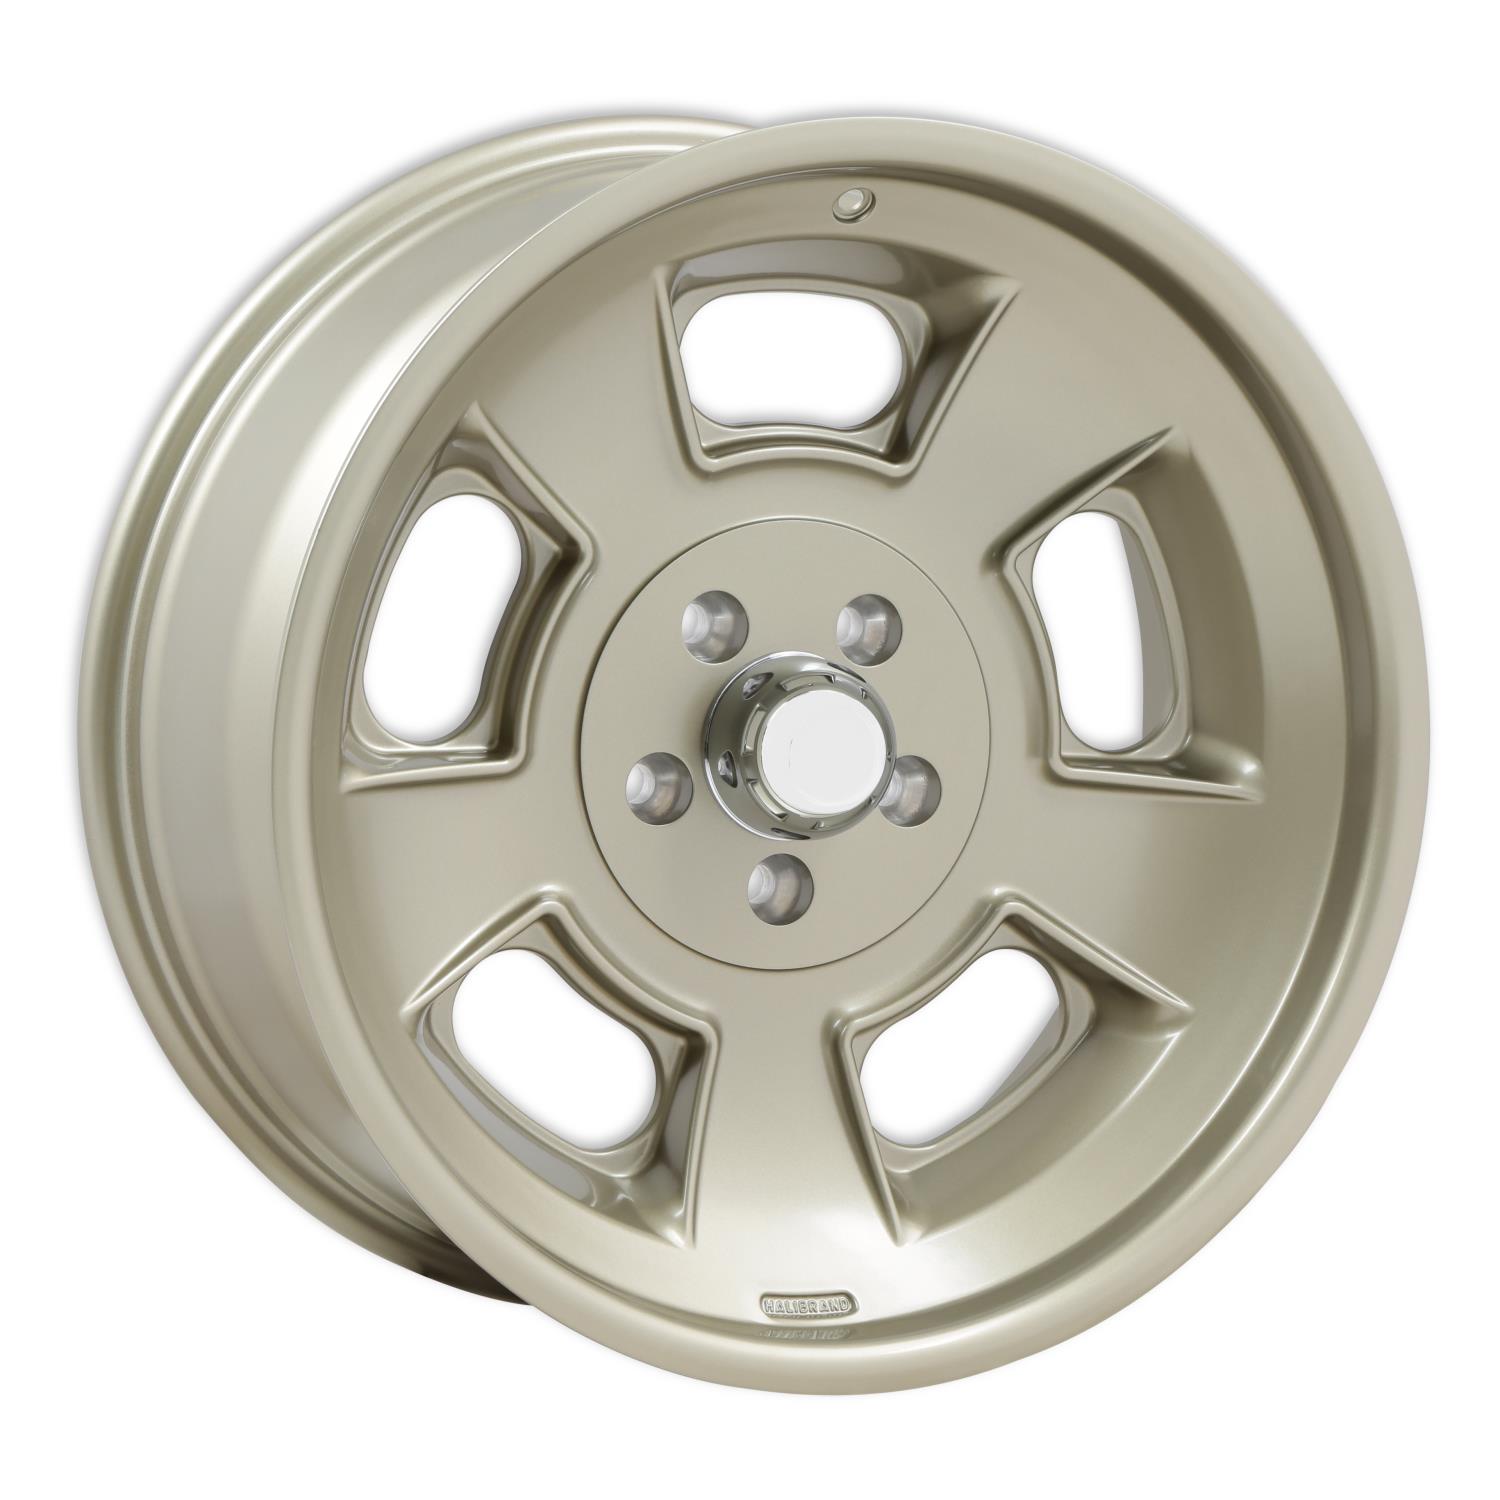 Sprint Front Wheel, Size: 20x8.5", Bolt Pattern: 5x5", Backspace: 4.5" [MAG7 - Semi Gloss Clearcoat]